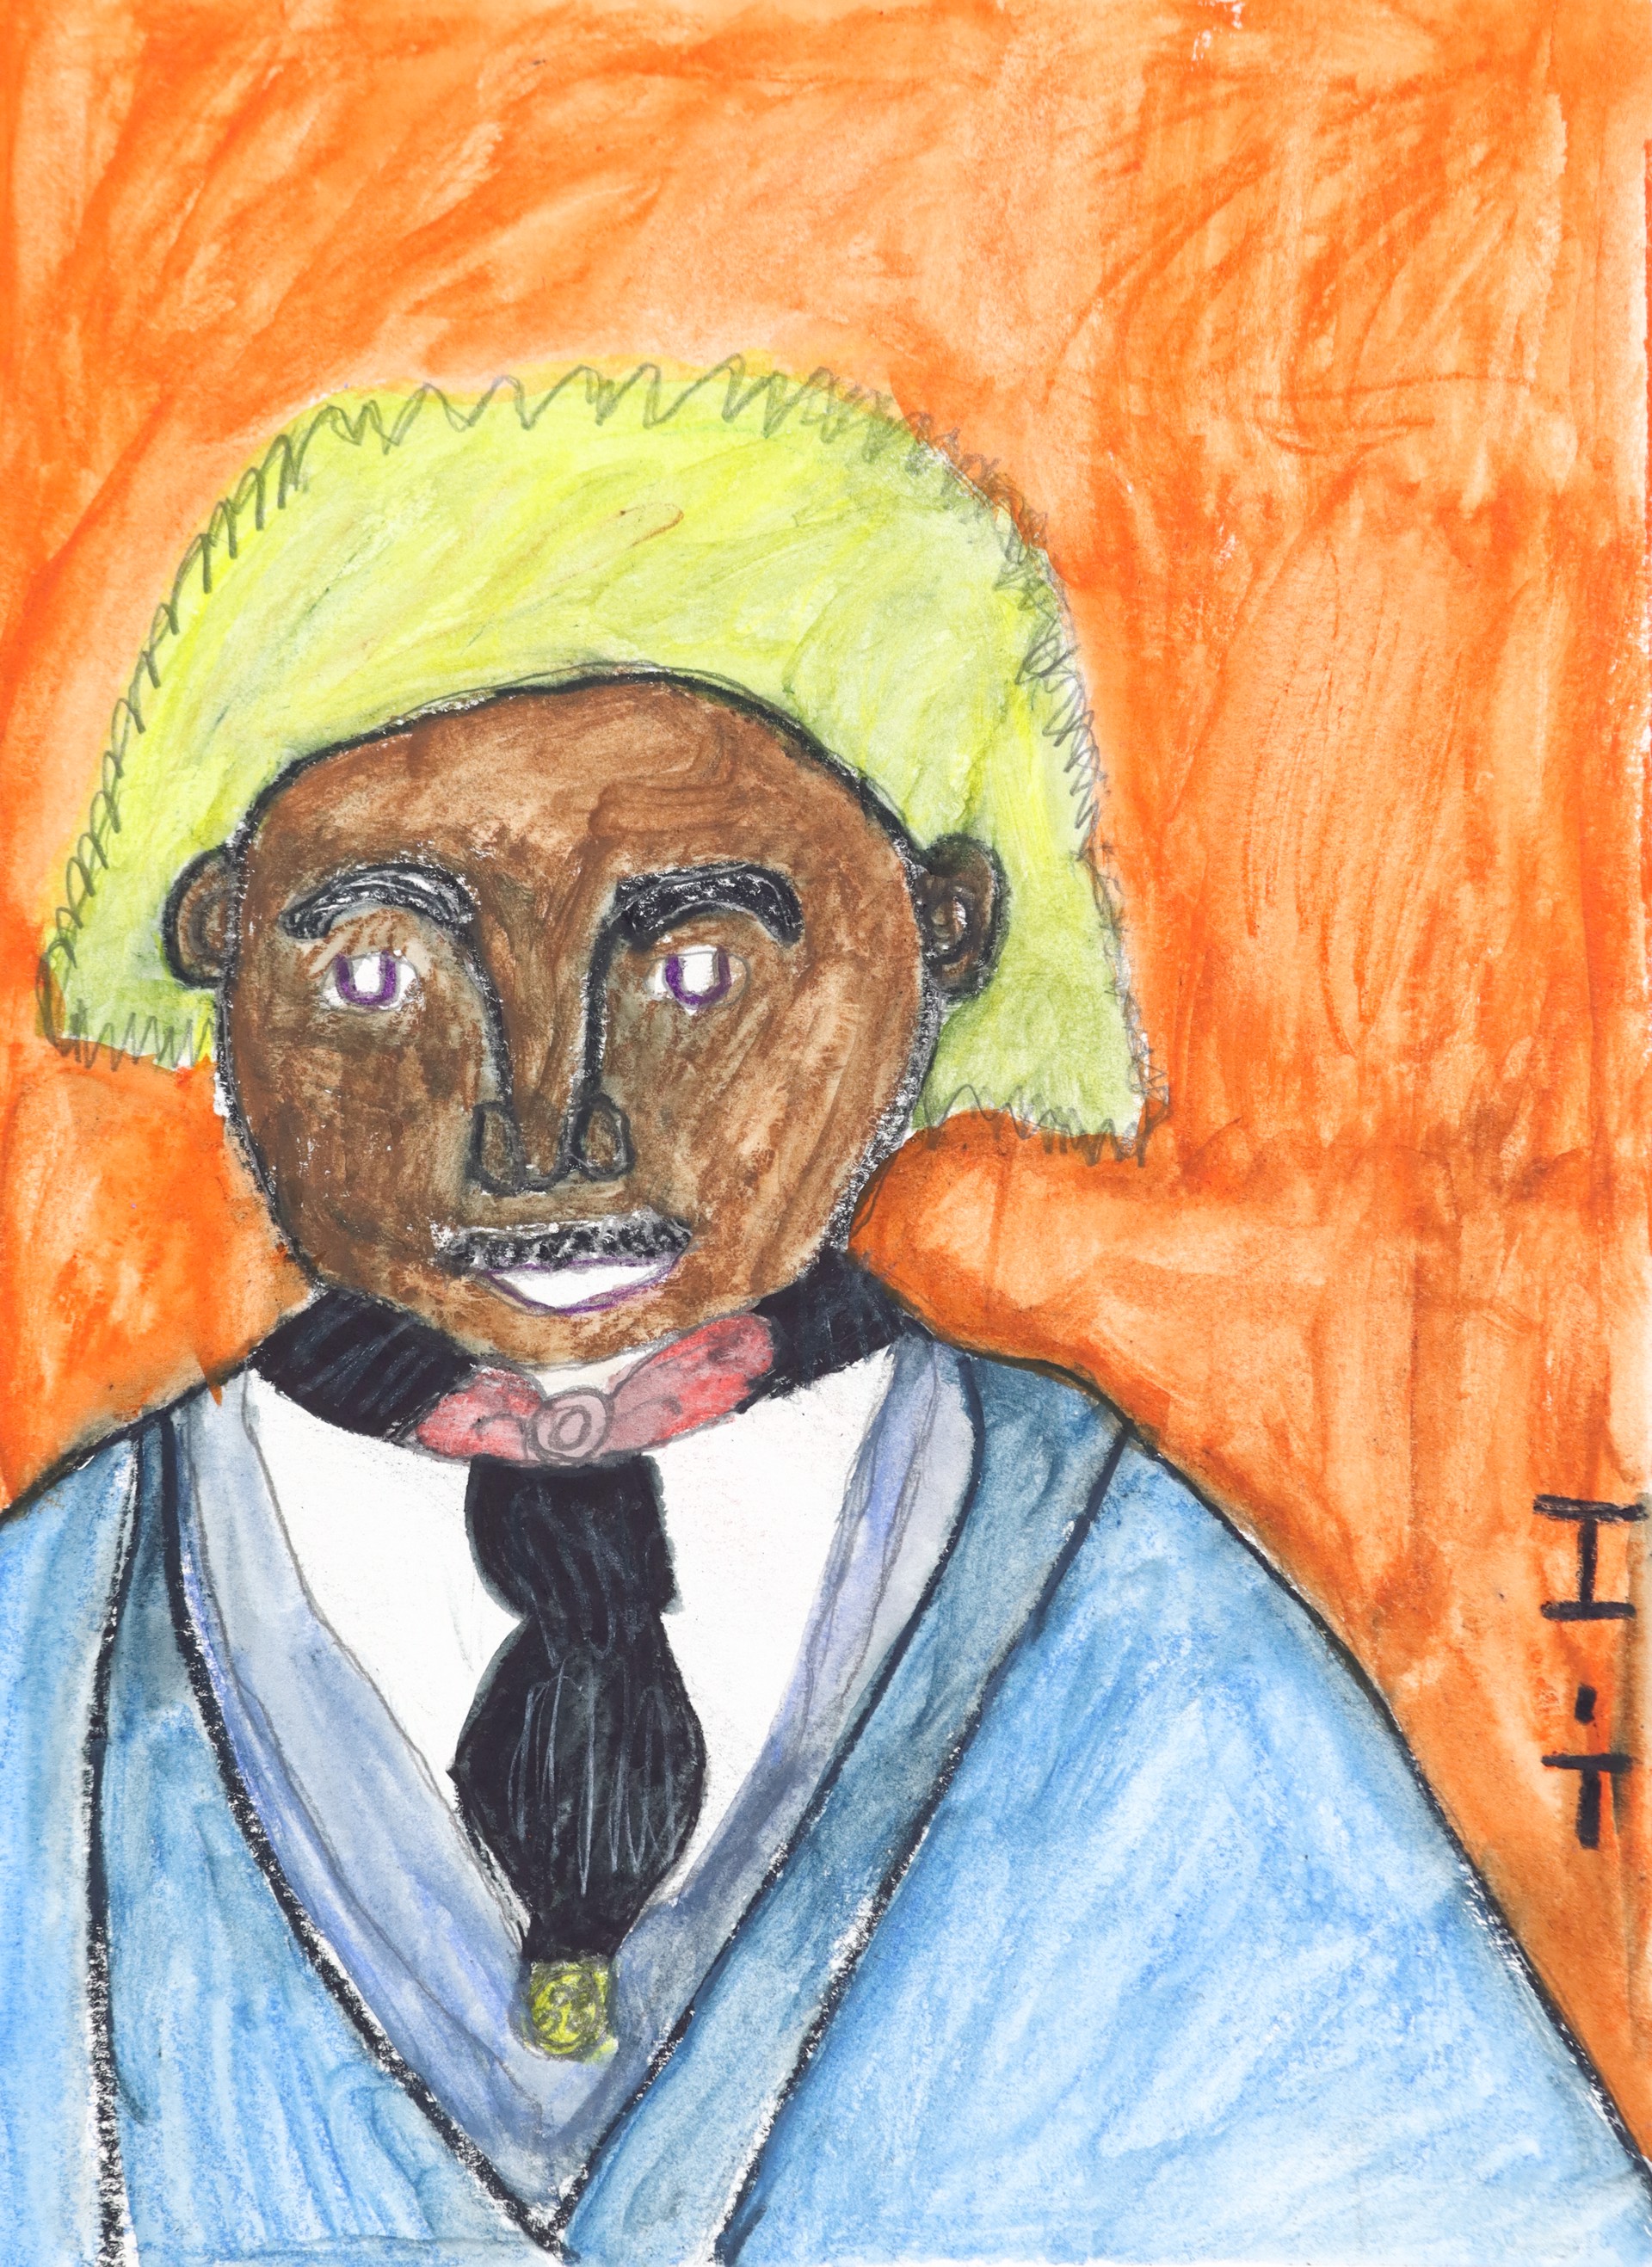 Man with Gold Medal by Imani Turner